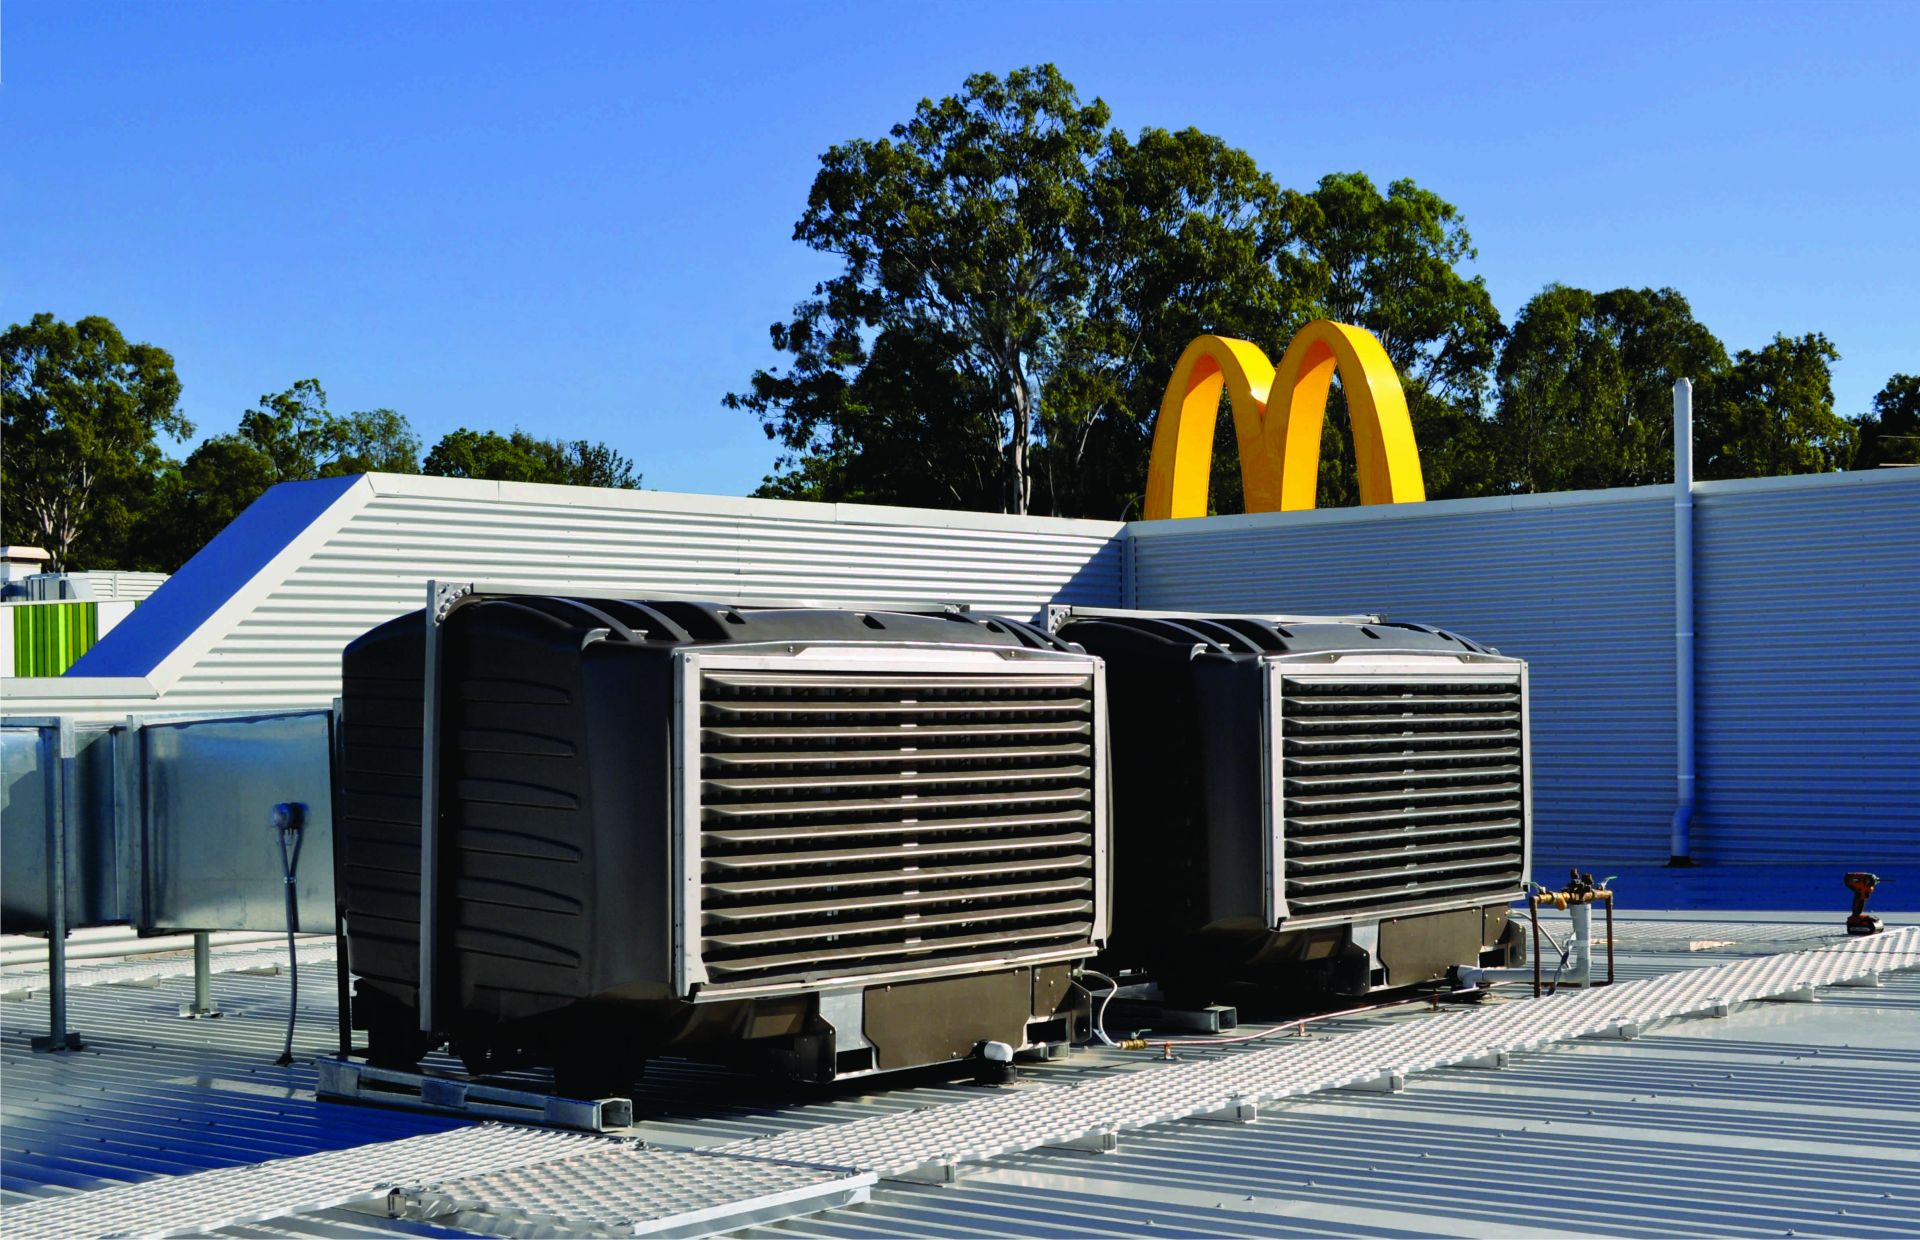 Supplementary Cooling Installation on Building Rooftop